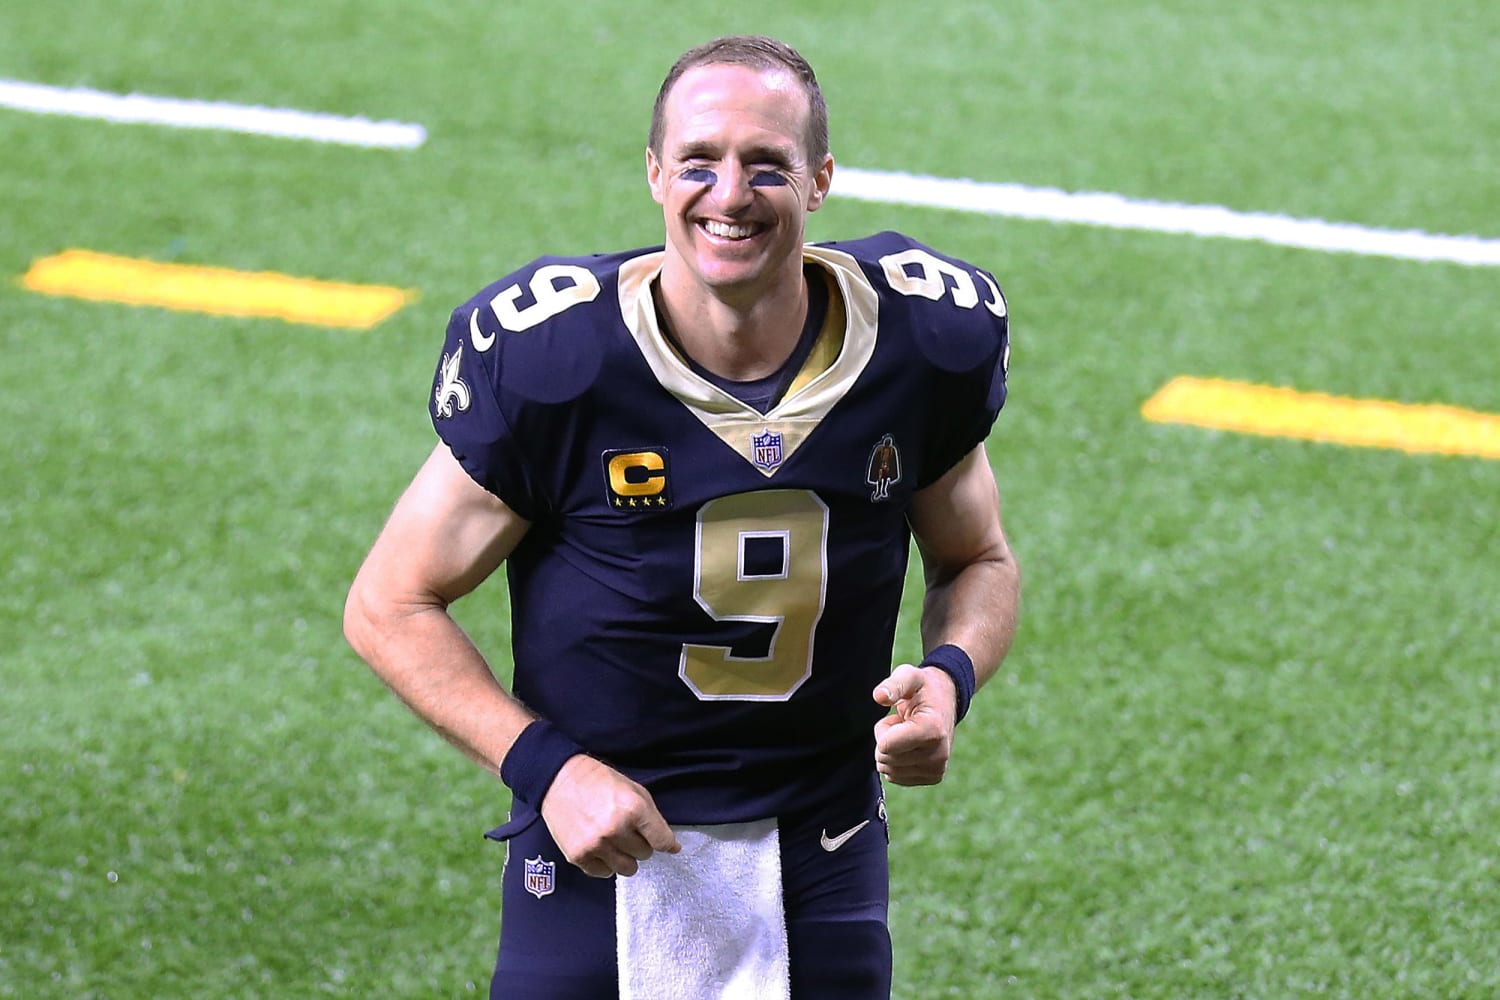 Drew Brees announces he will work for NBC after retiring from football